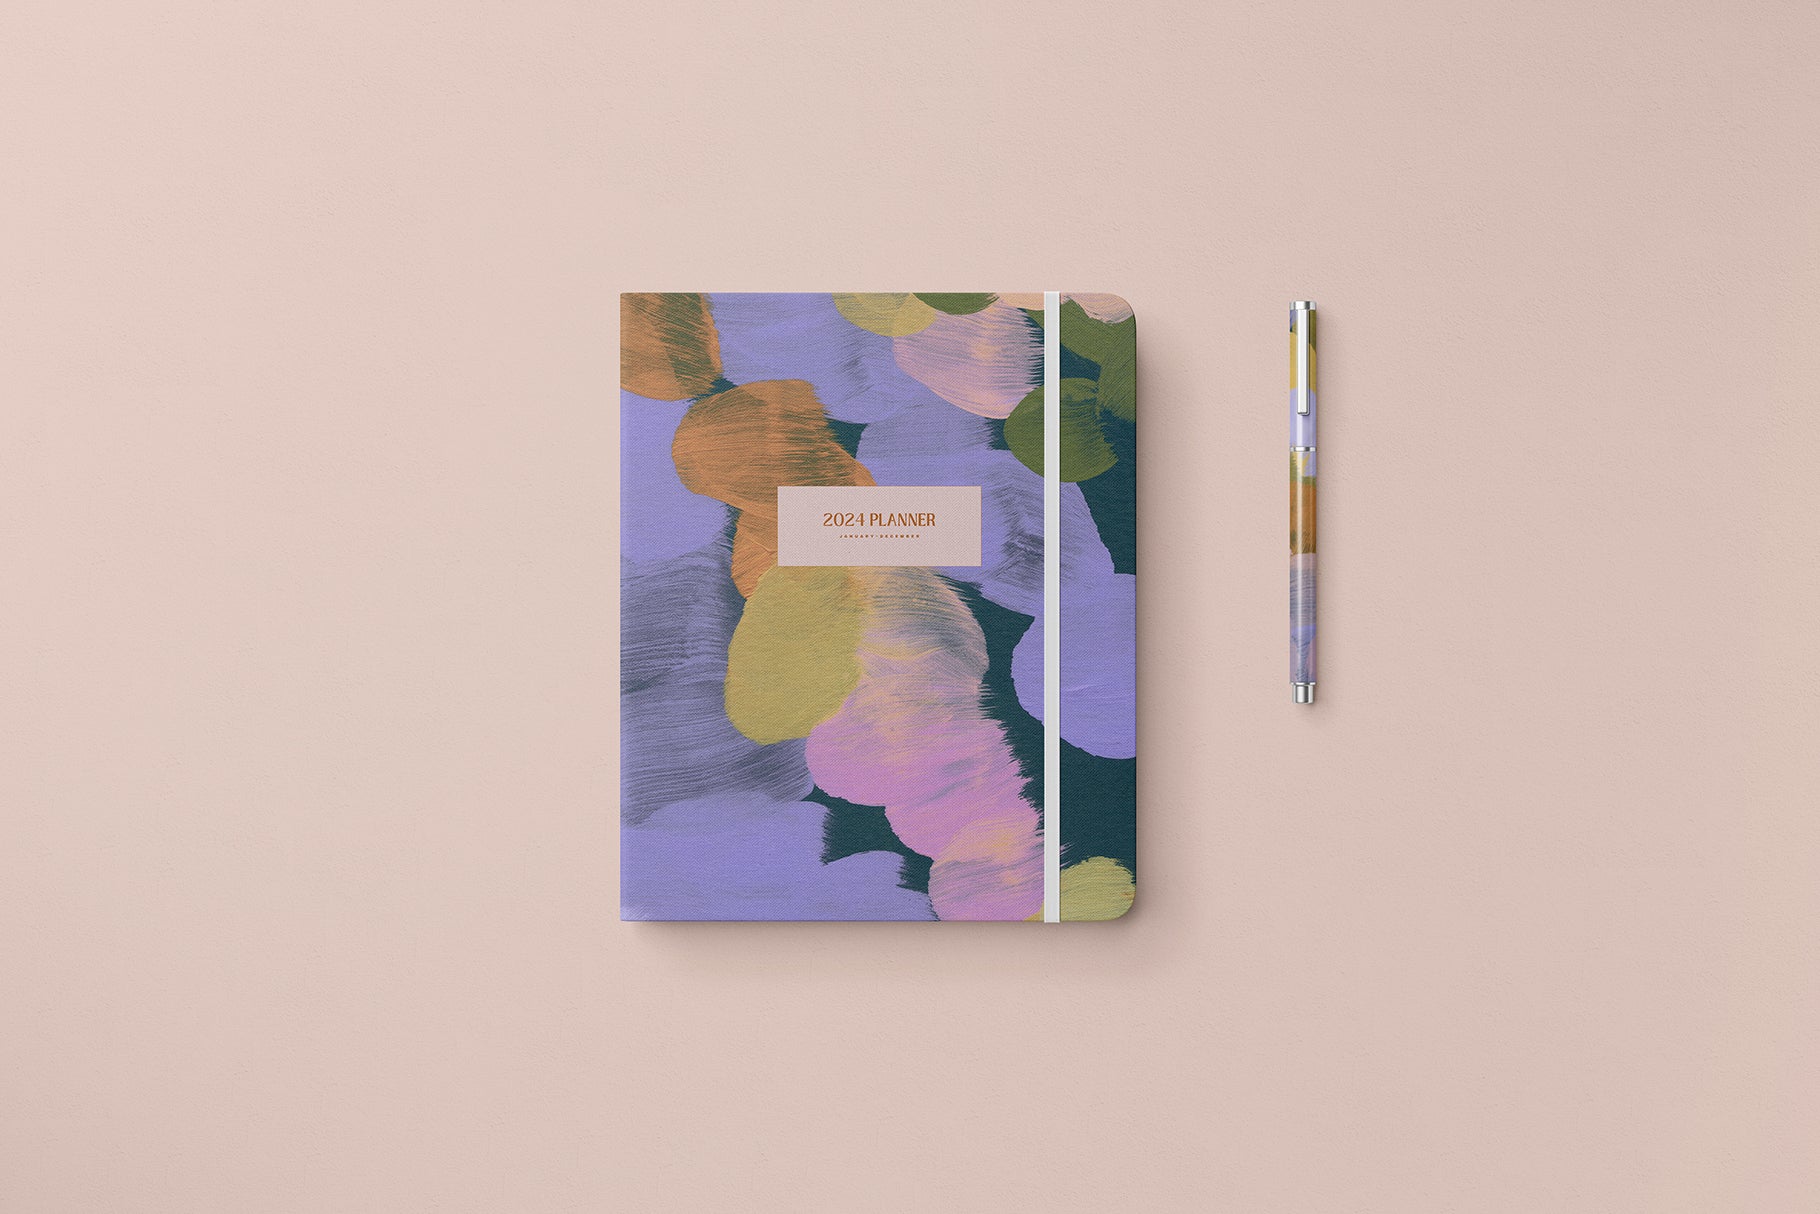 painted artistic background on top of planner design